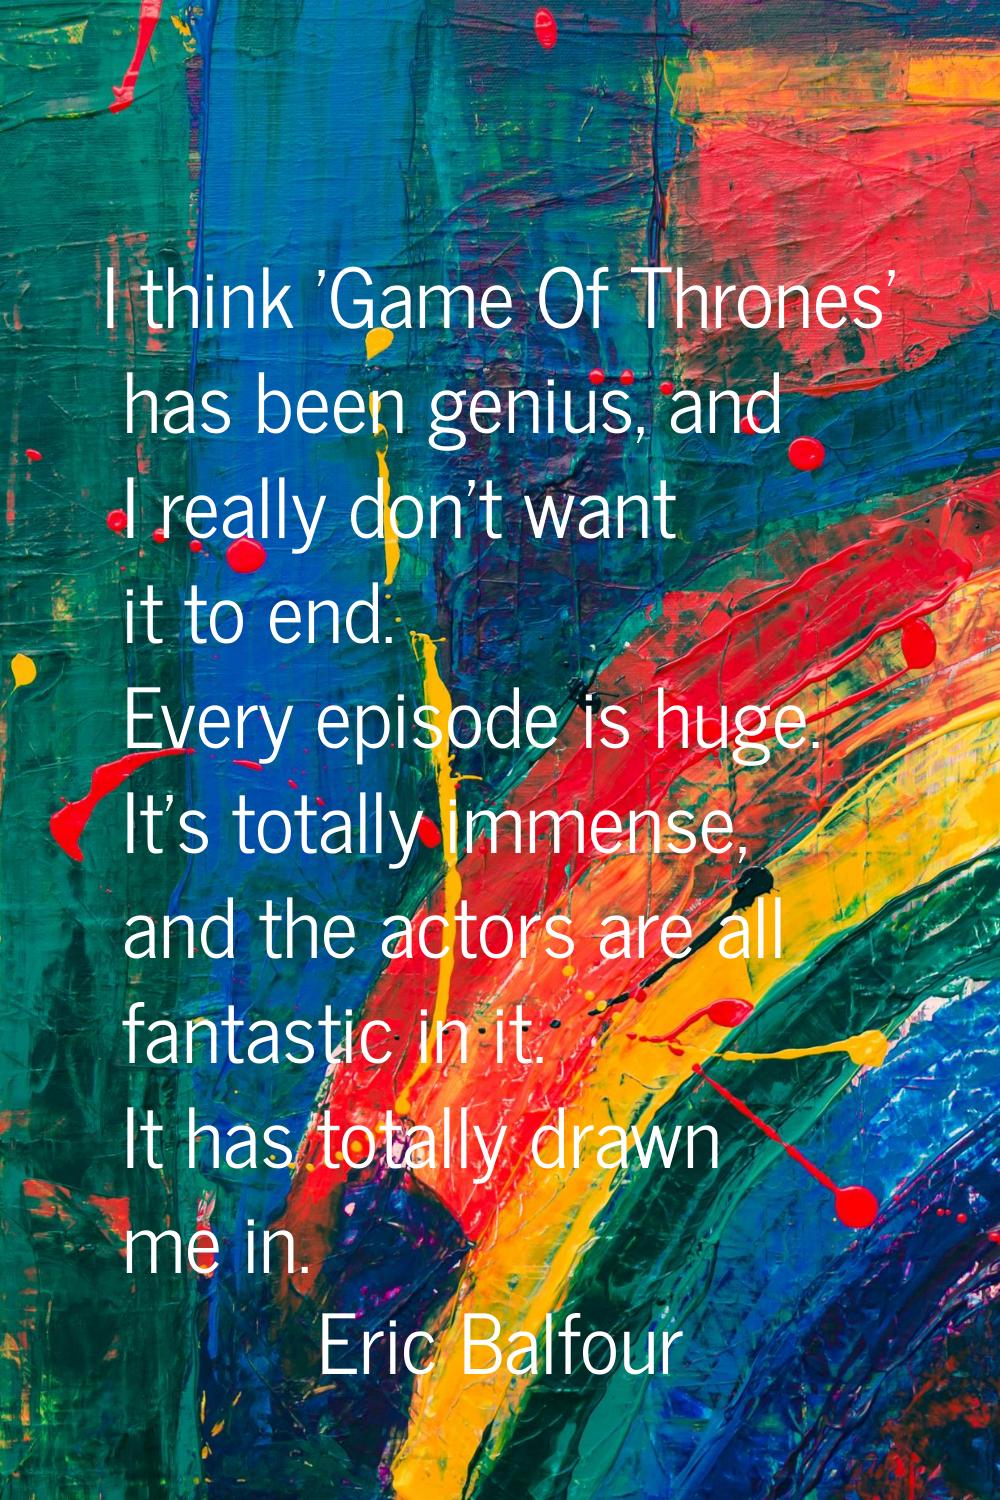 I think 'Game Of Thrones' has been genius, and I really don't want it to end. Every episode is huge